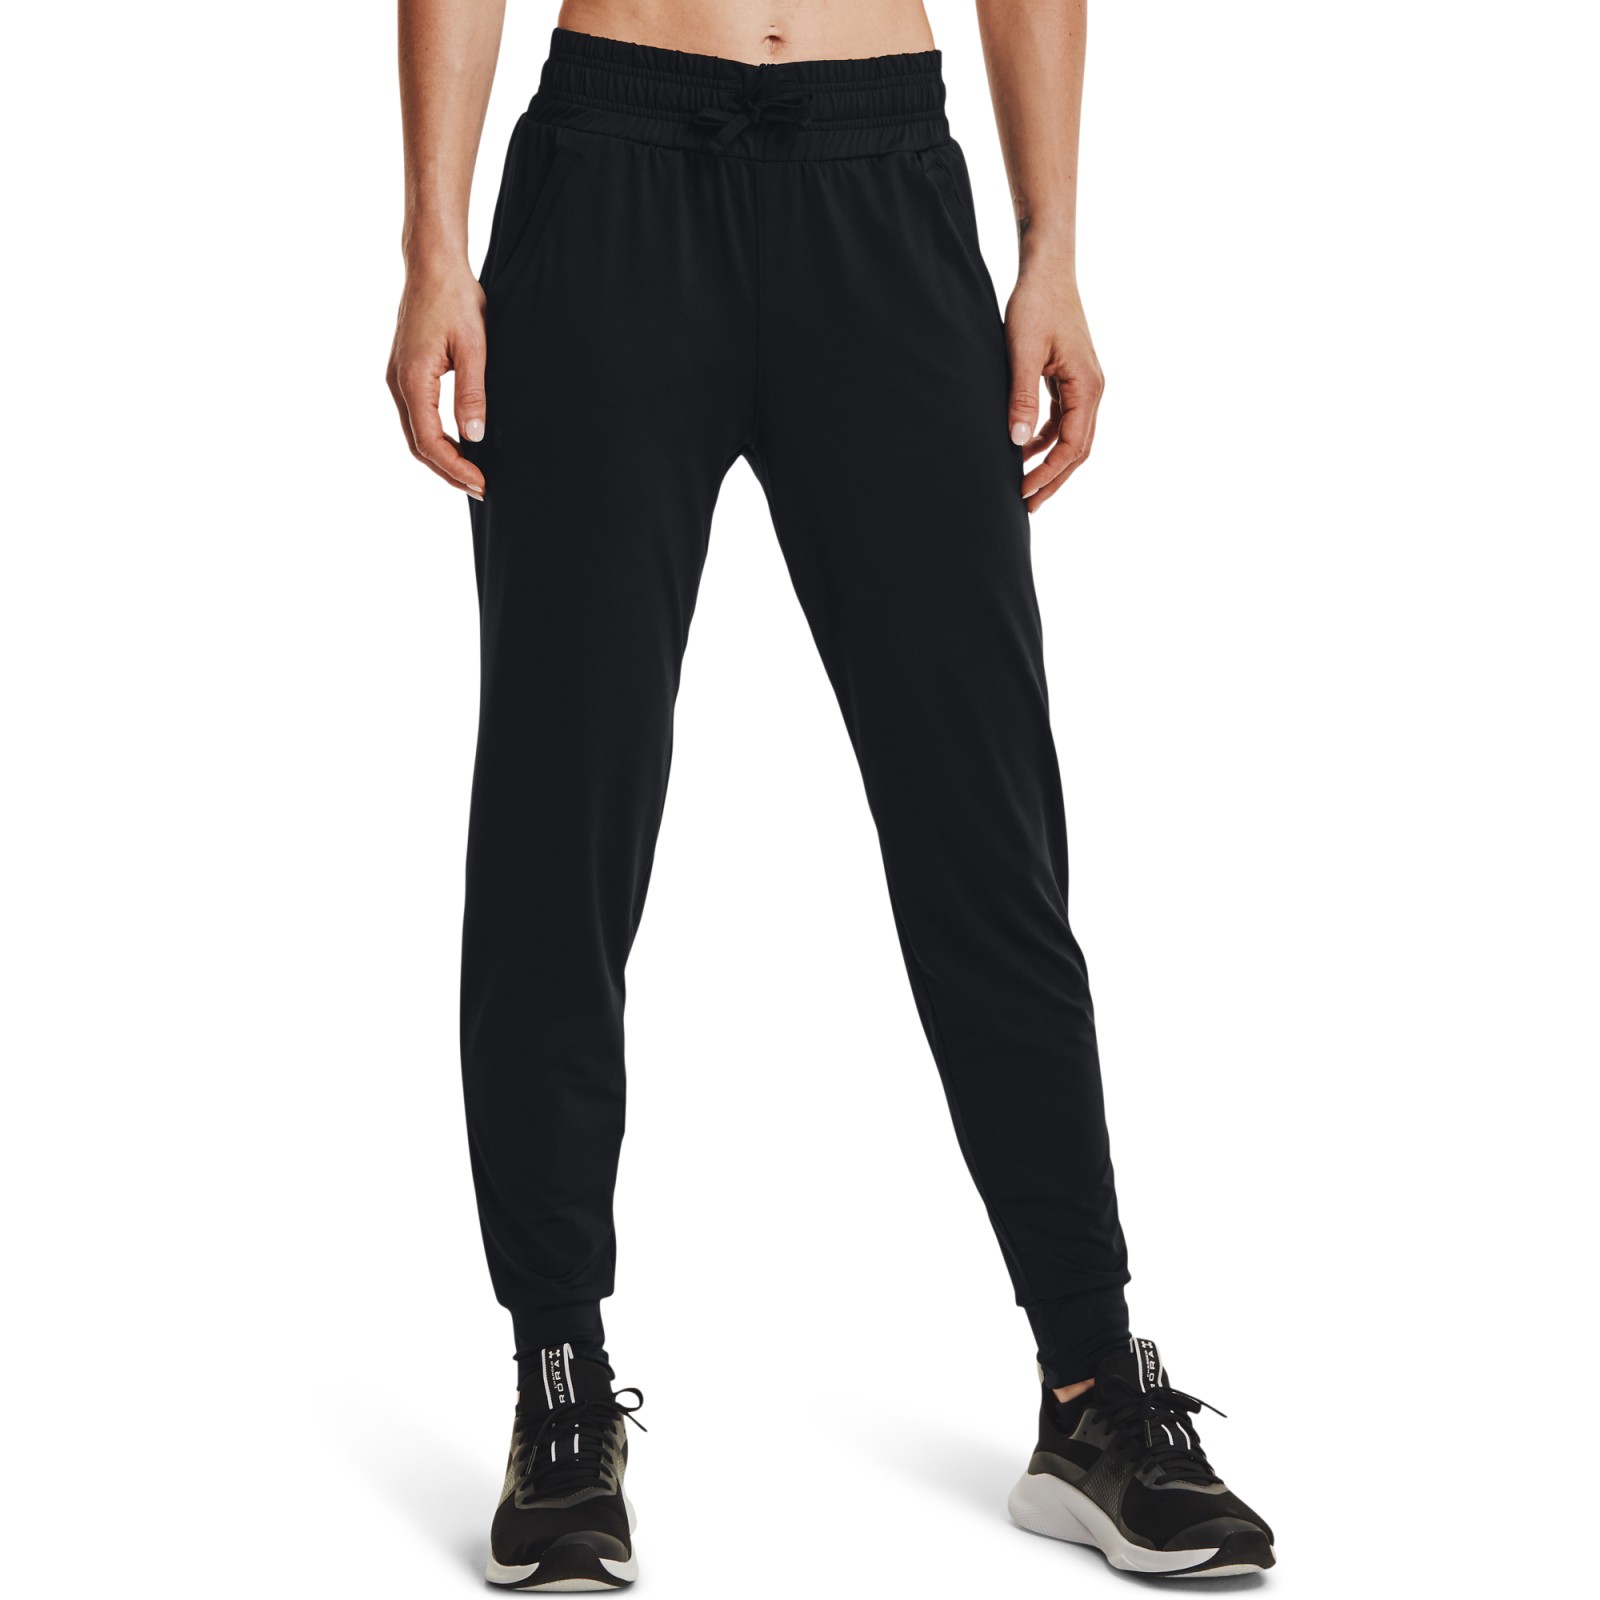 Under Armour NEW FABRIC HG Armour Pant XS.